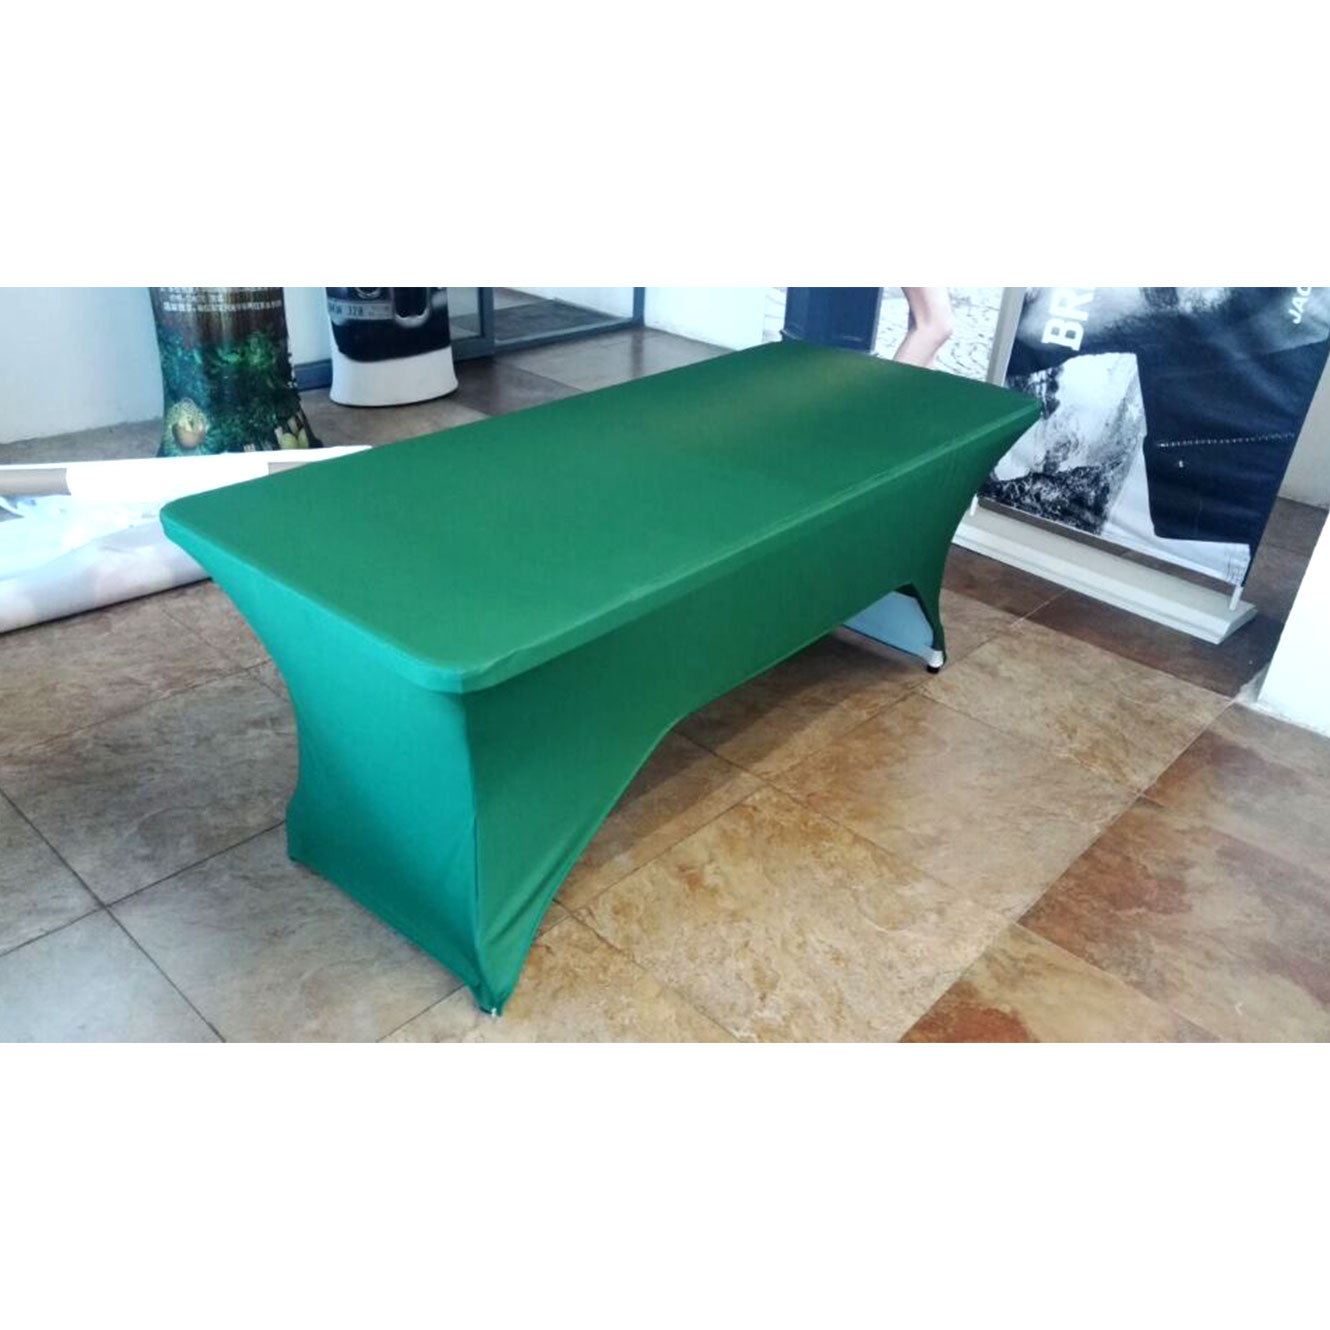 https://bigbanner.com.au/wp-content/uploads/2020/01/6ft-8ft-Stretch-Printed-Fitted-Table-Cloths-7.jpg